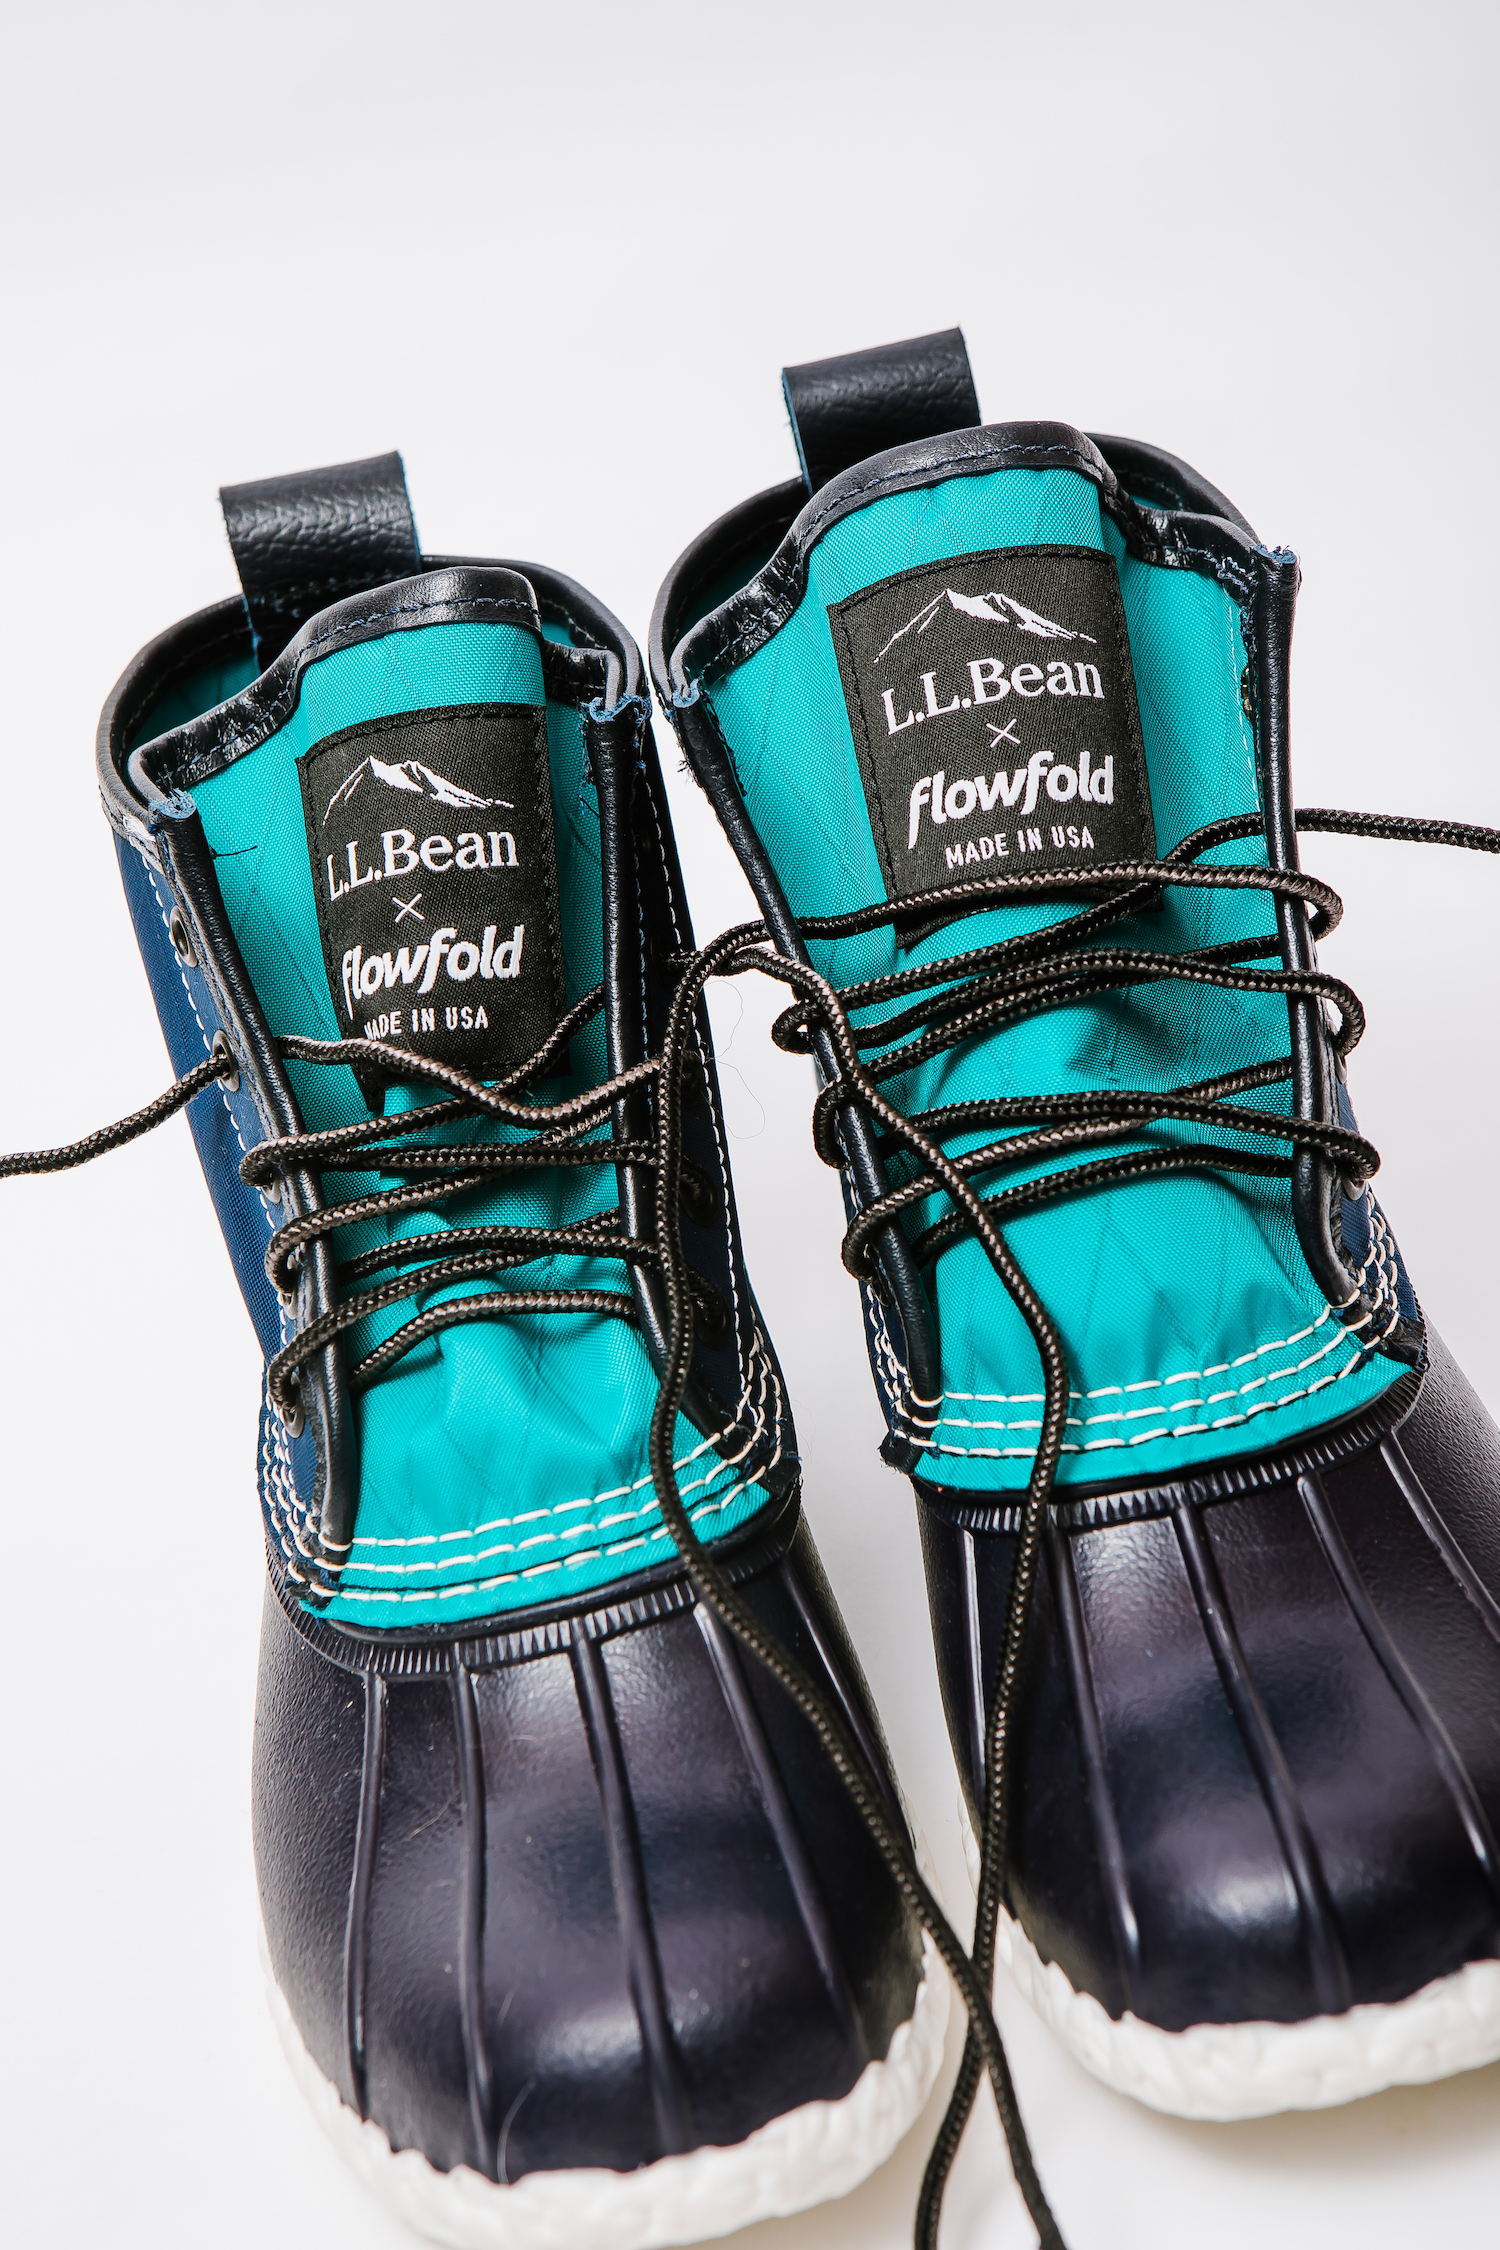 L.L.Bean's iconic boots are made in Maine with Flowfold's USA-made X-Pac fabric.